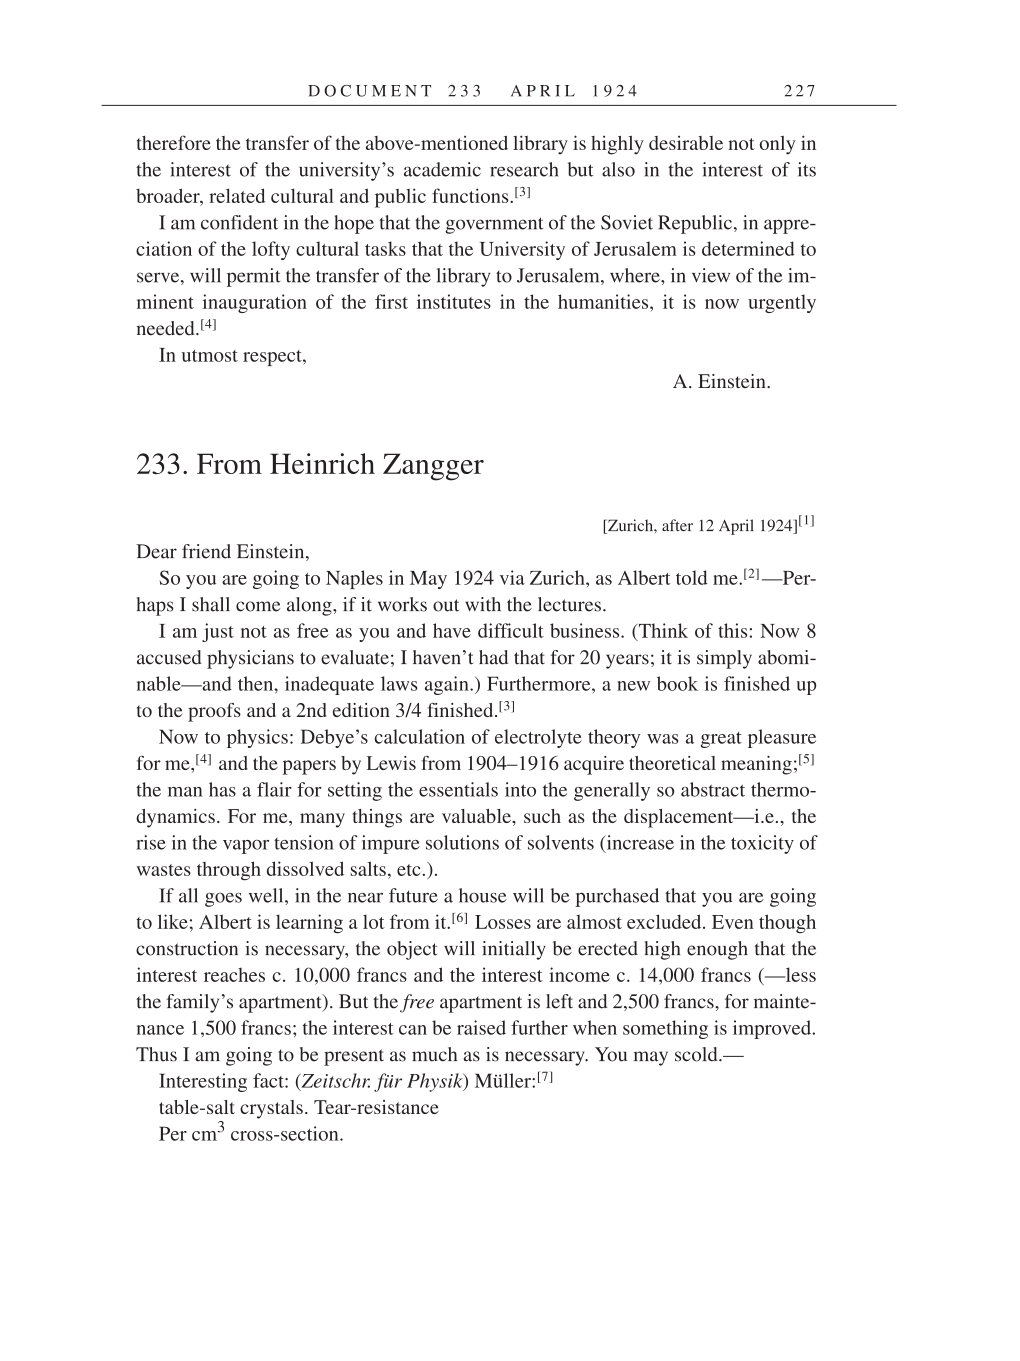 Volume 14: The Berlin Years: Writings & Correspondence, April 1923-May 1925 (English Translation Supplement) page 227